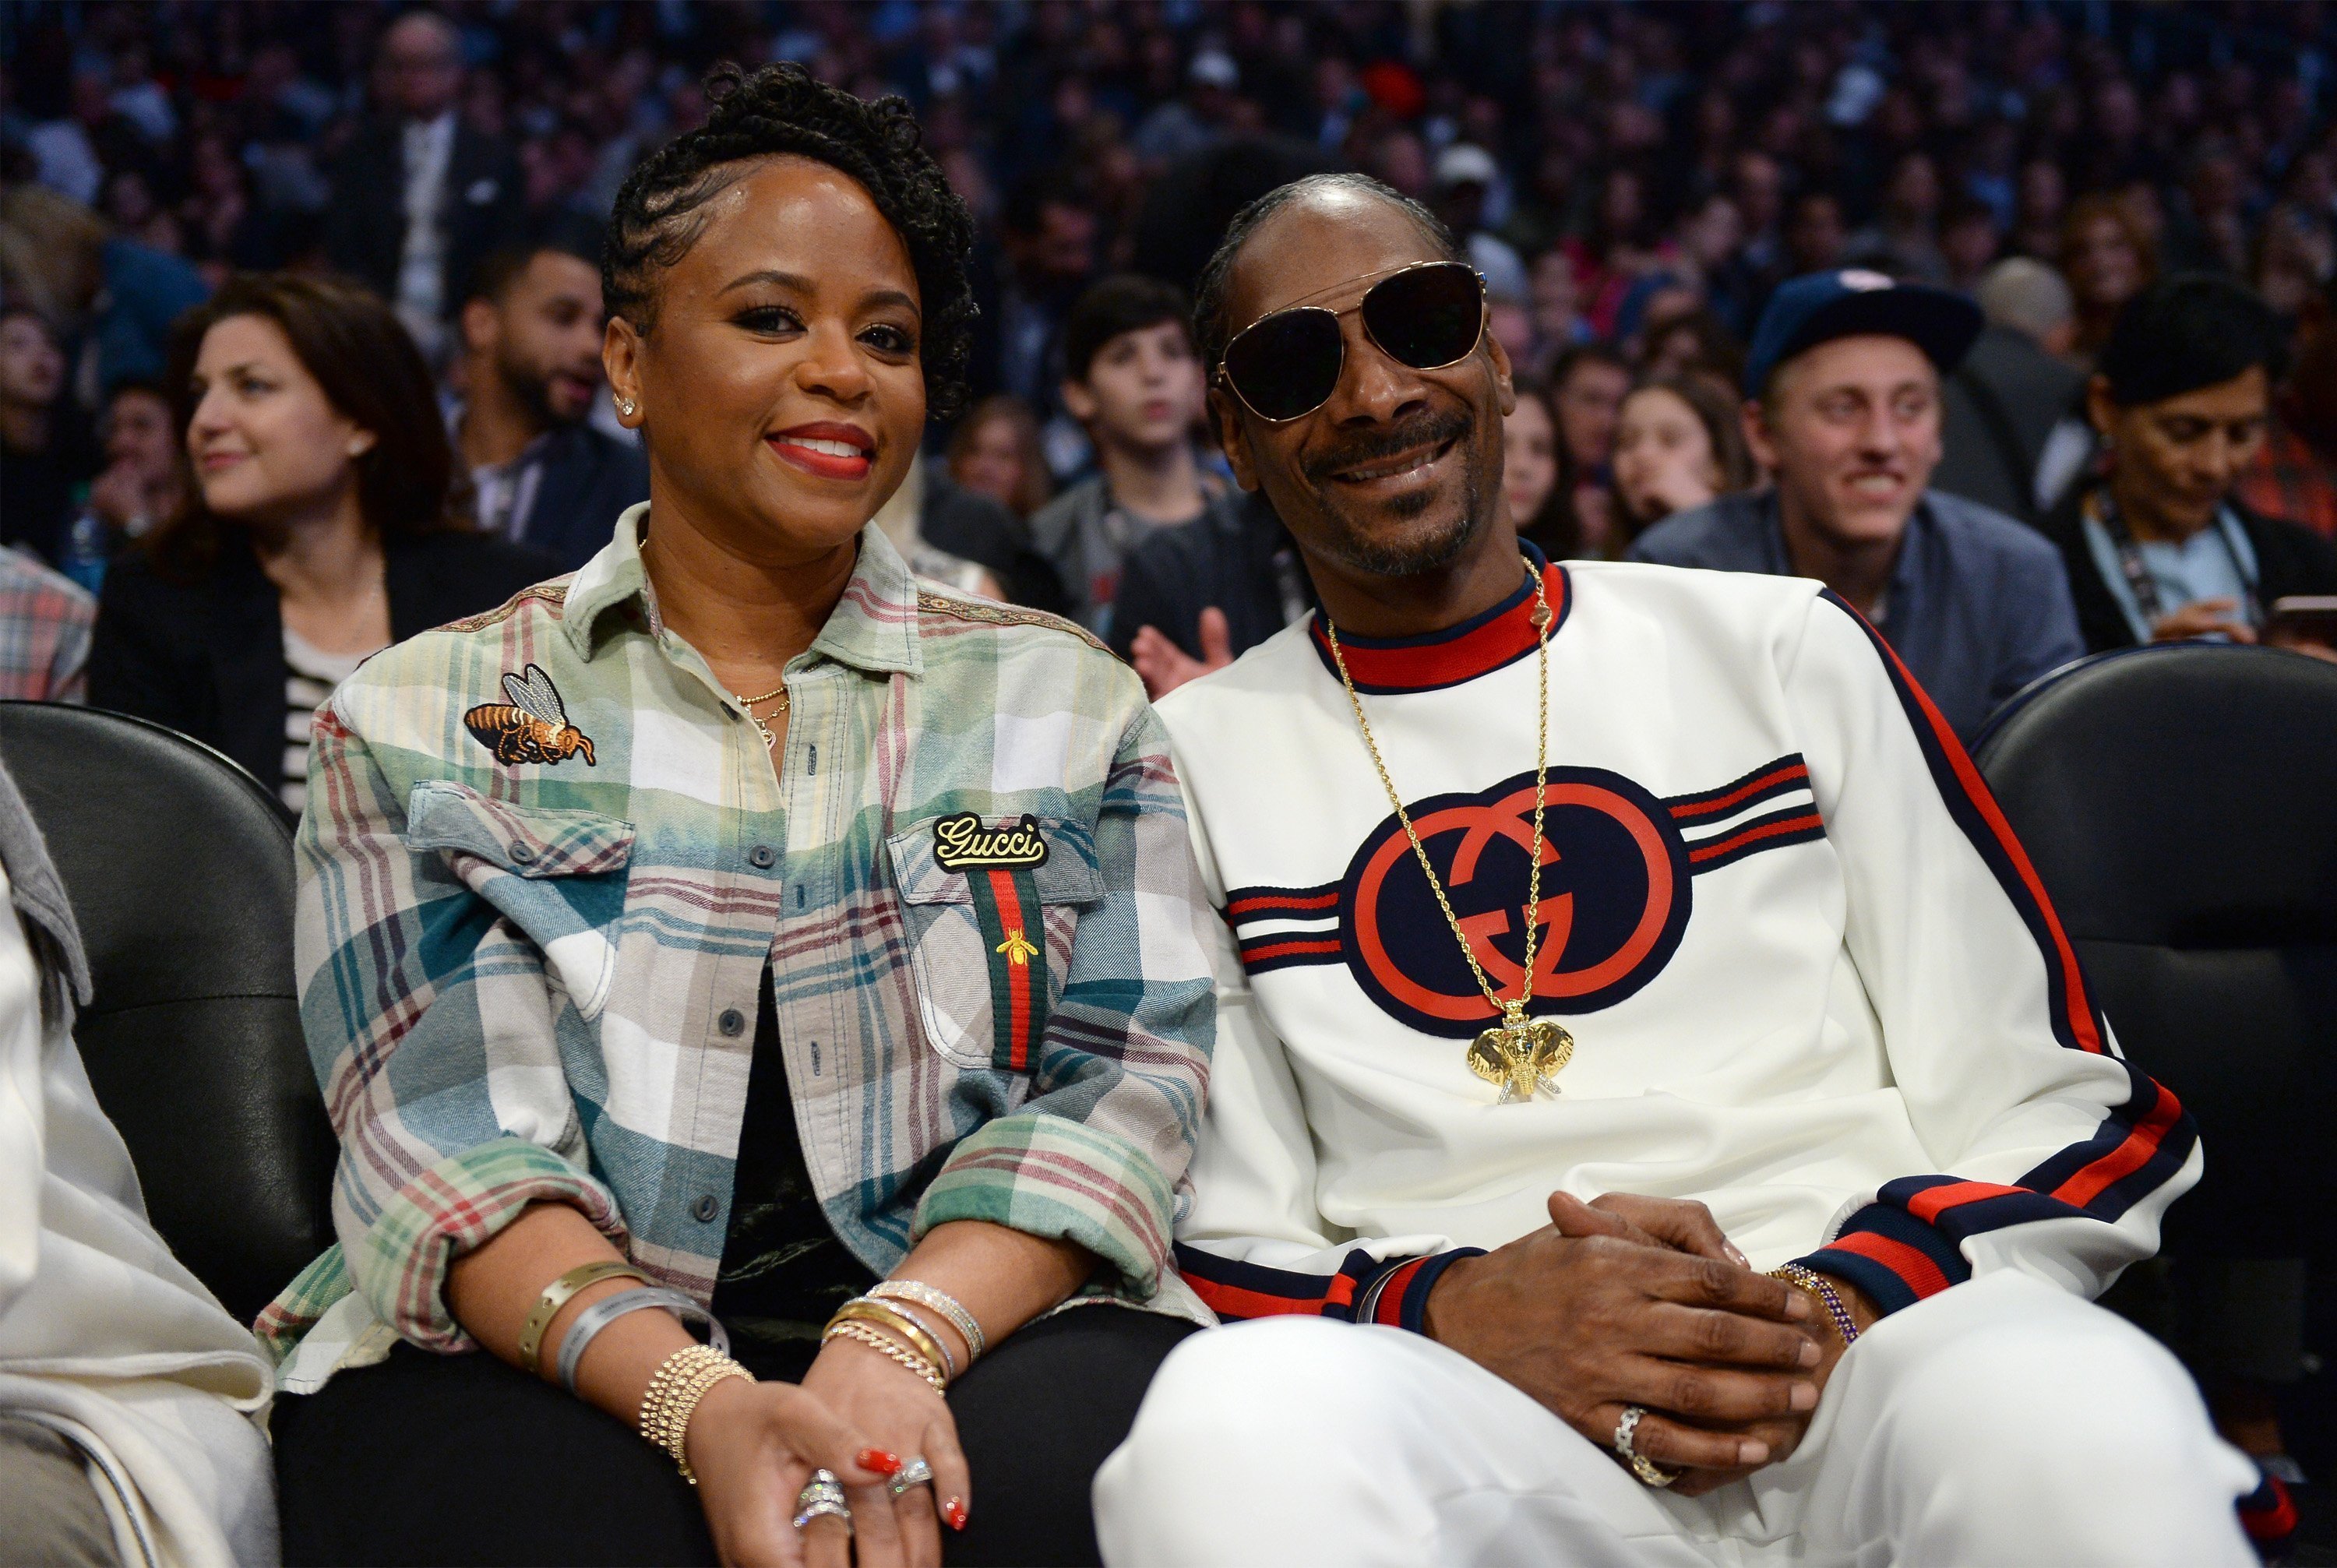 Snoop Dogg and wife Shante attend the NBA All-Star Game 2018 at Staples Center on February 18, 2018. | Source: Getty Images